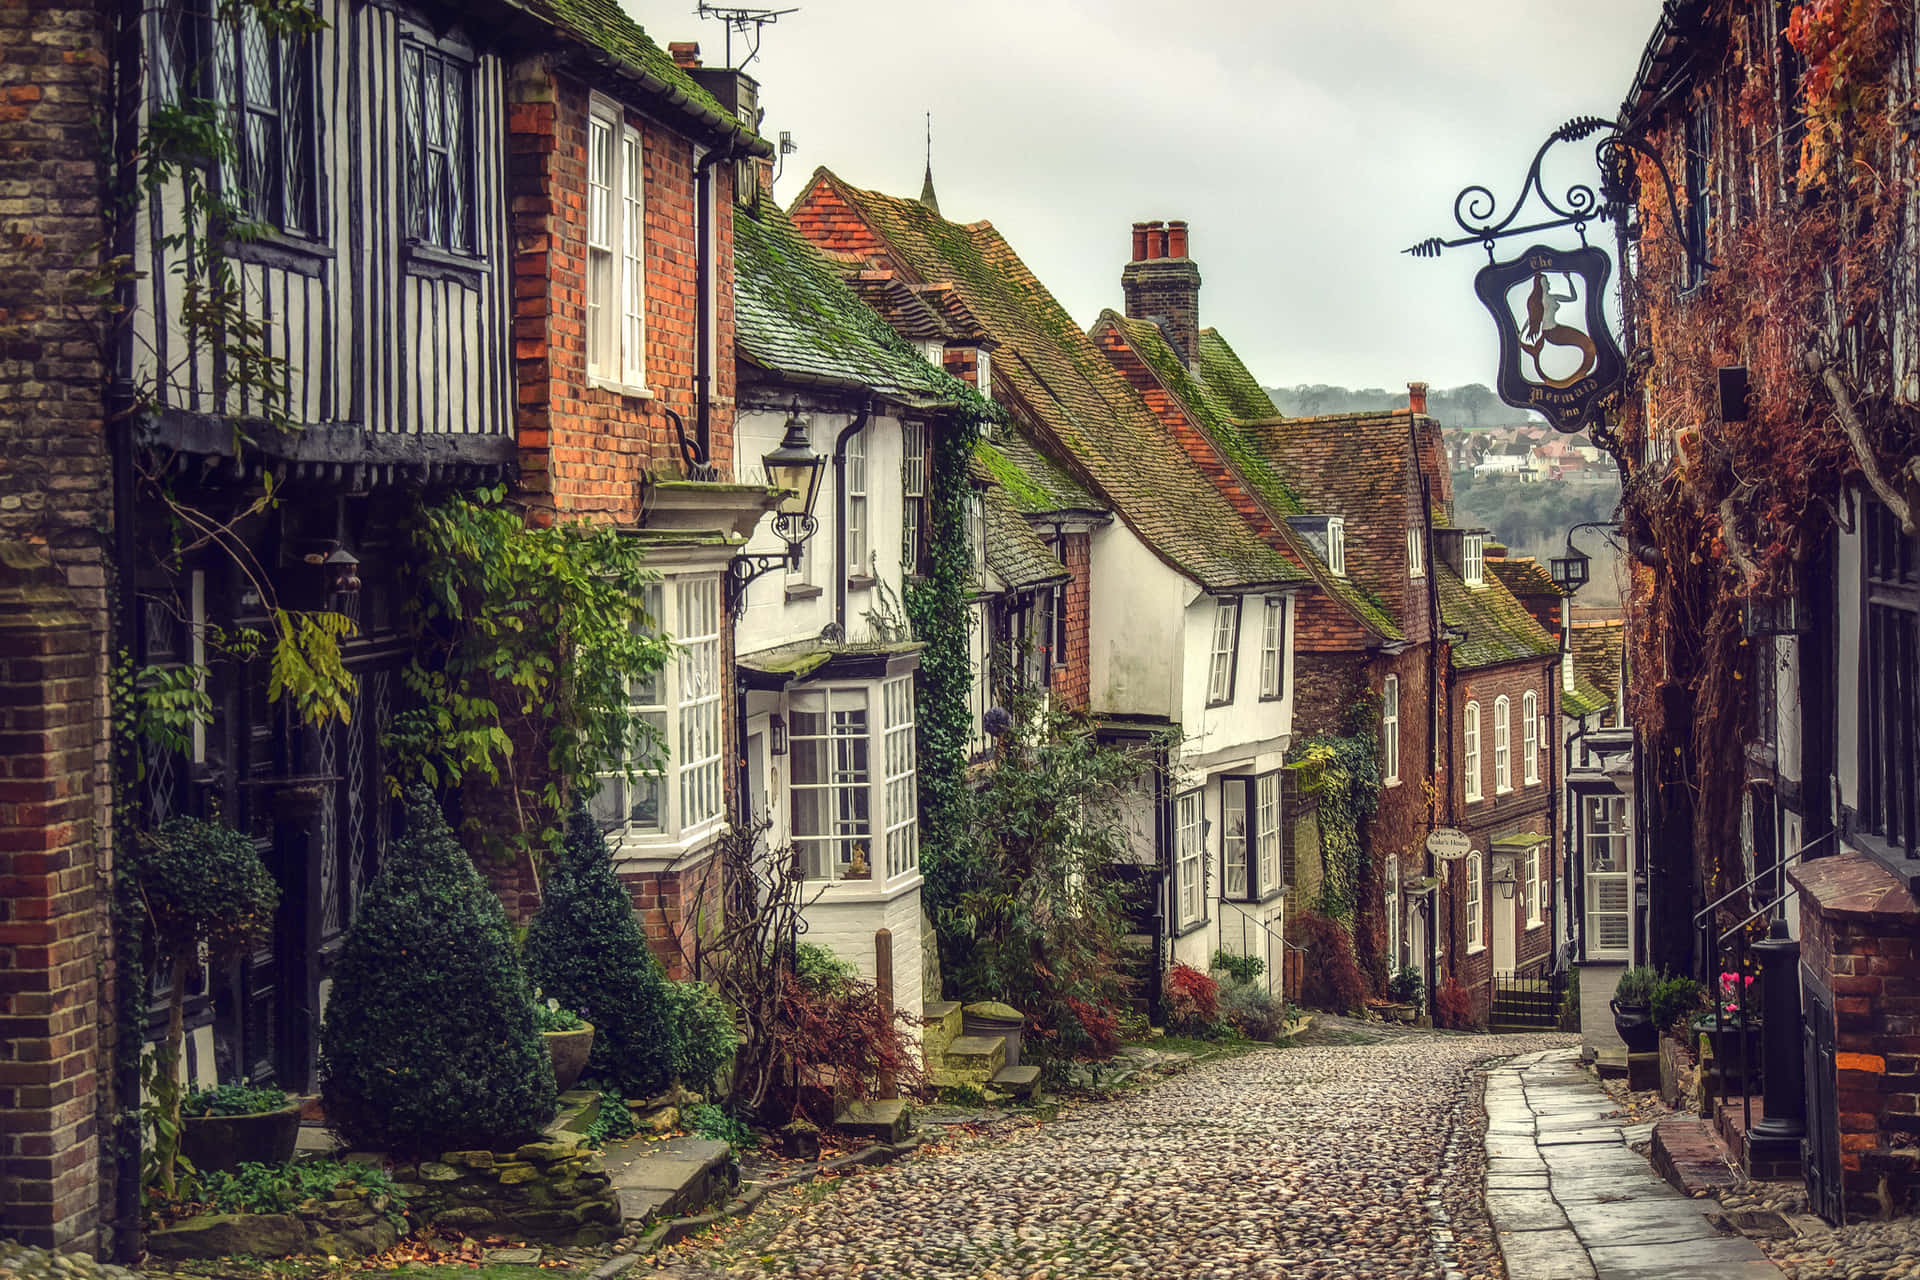 A Local Street In England Wallpaper